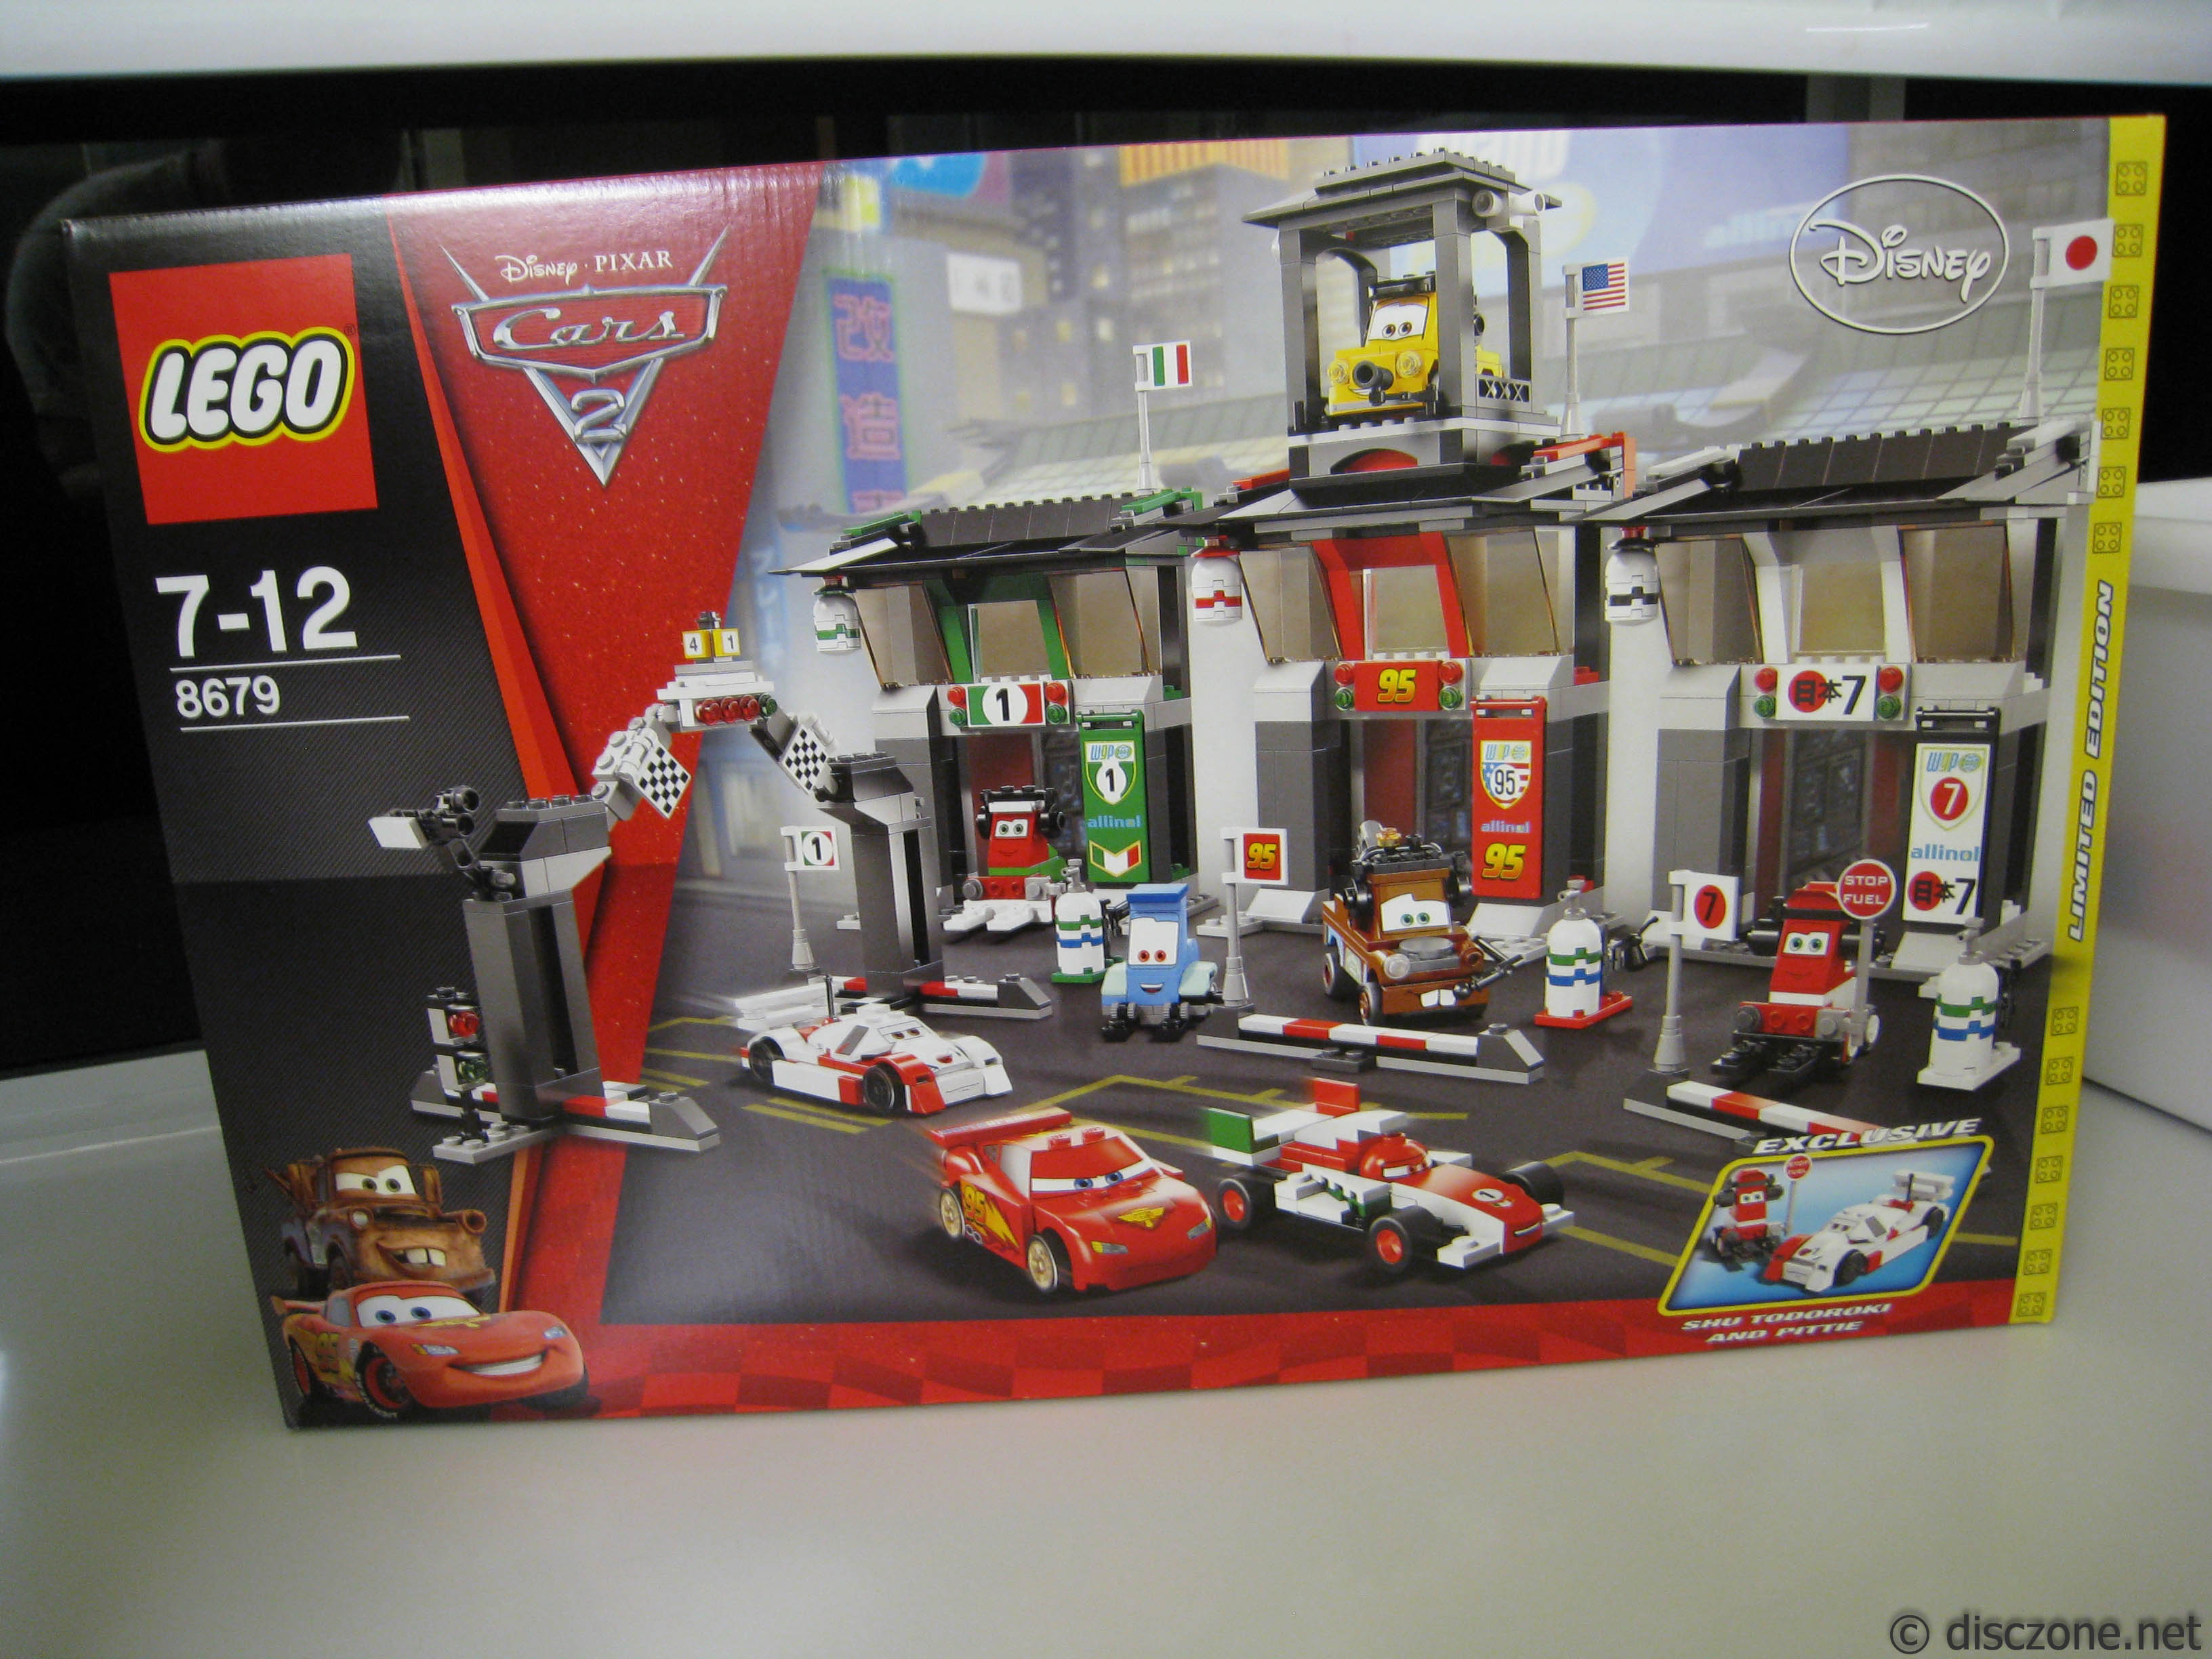 Another the Lego Cars 2 Series..